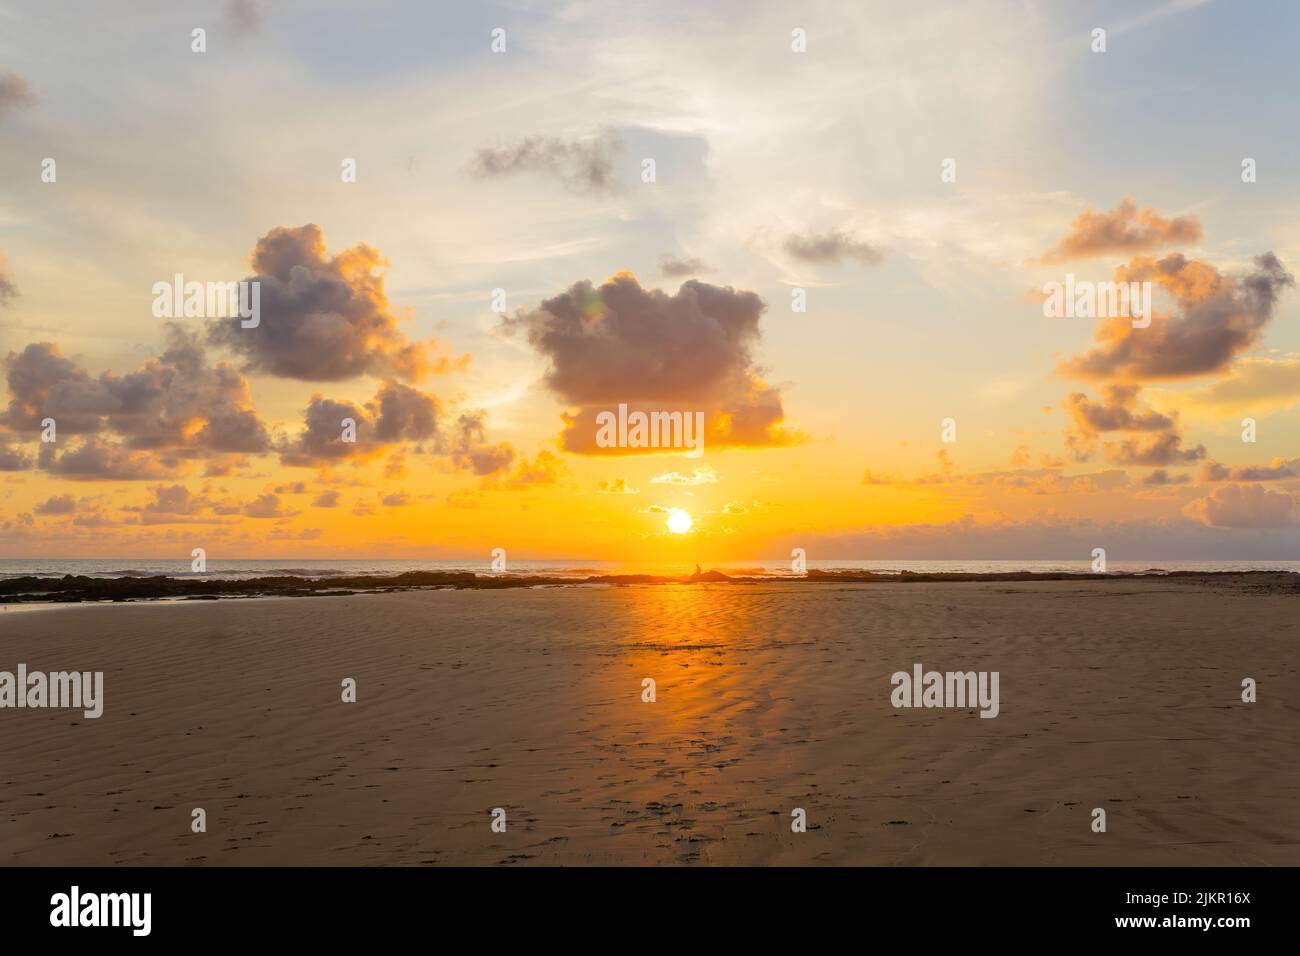 Scenic cloudscape over a tropical beach at sunset. Stock Photo